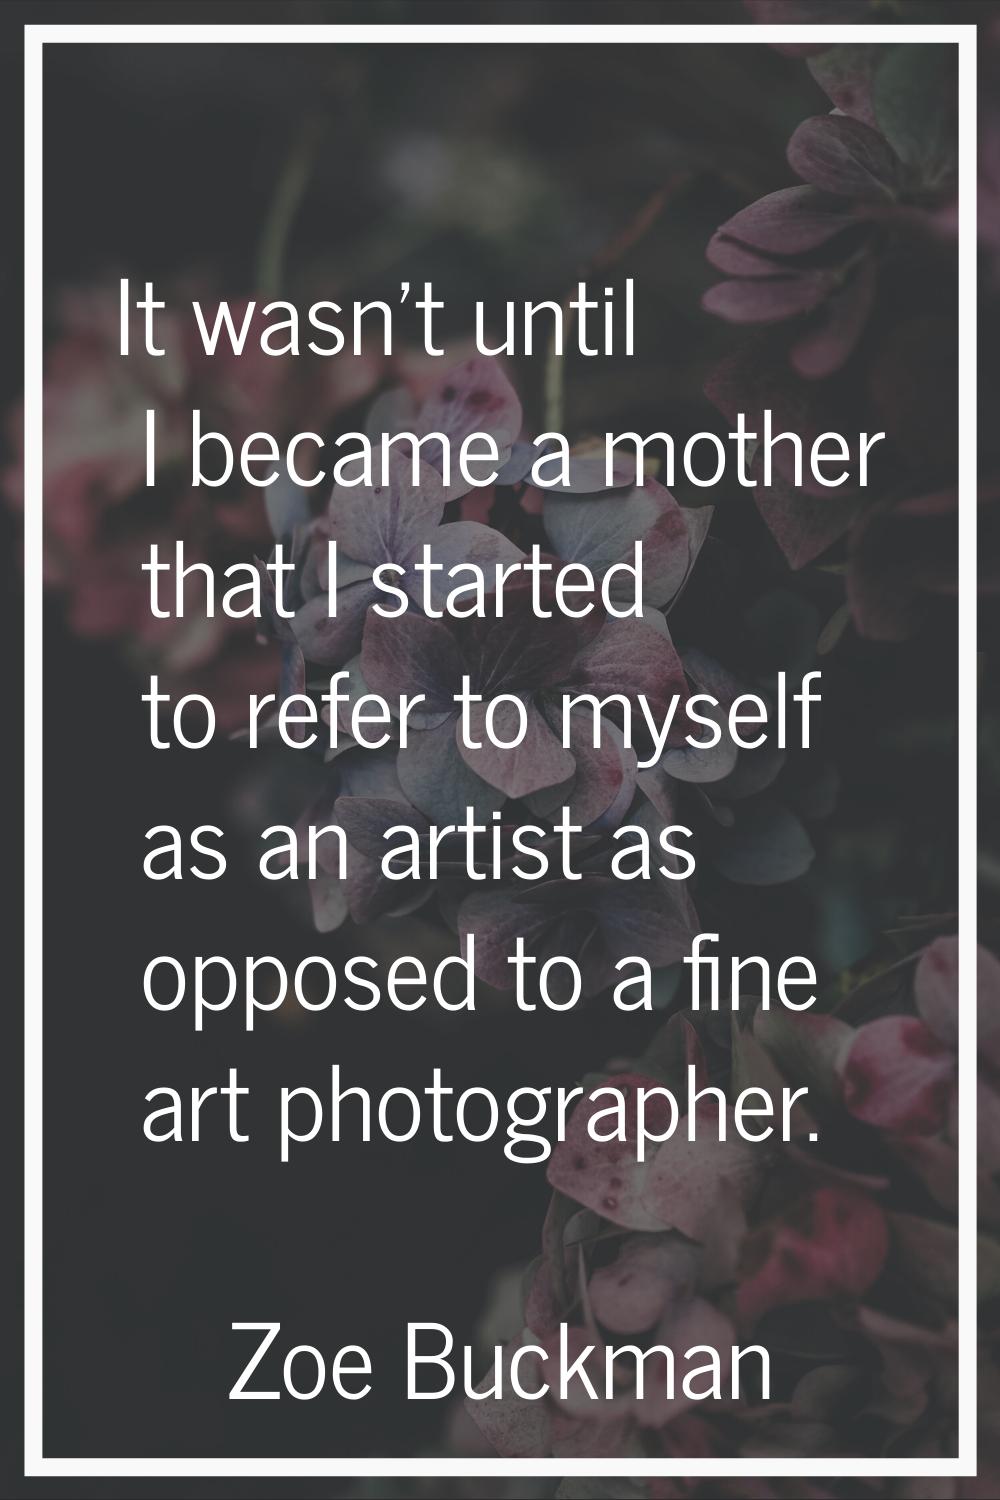 It wasn't until I became a mother that I started to refer to myself as an artist as opposed to a fi